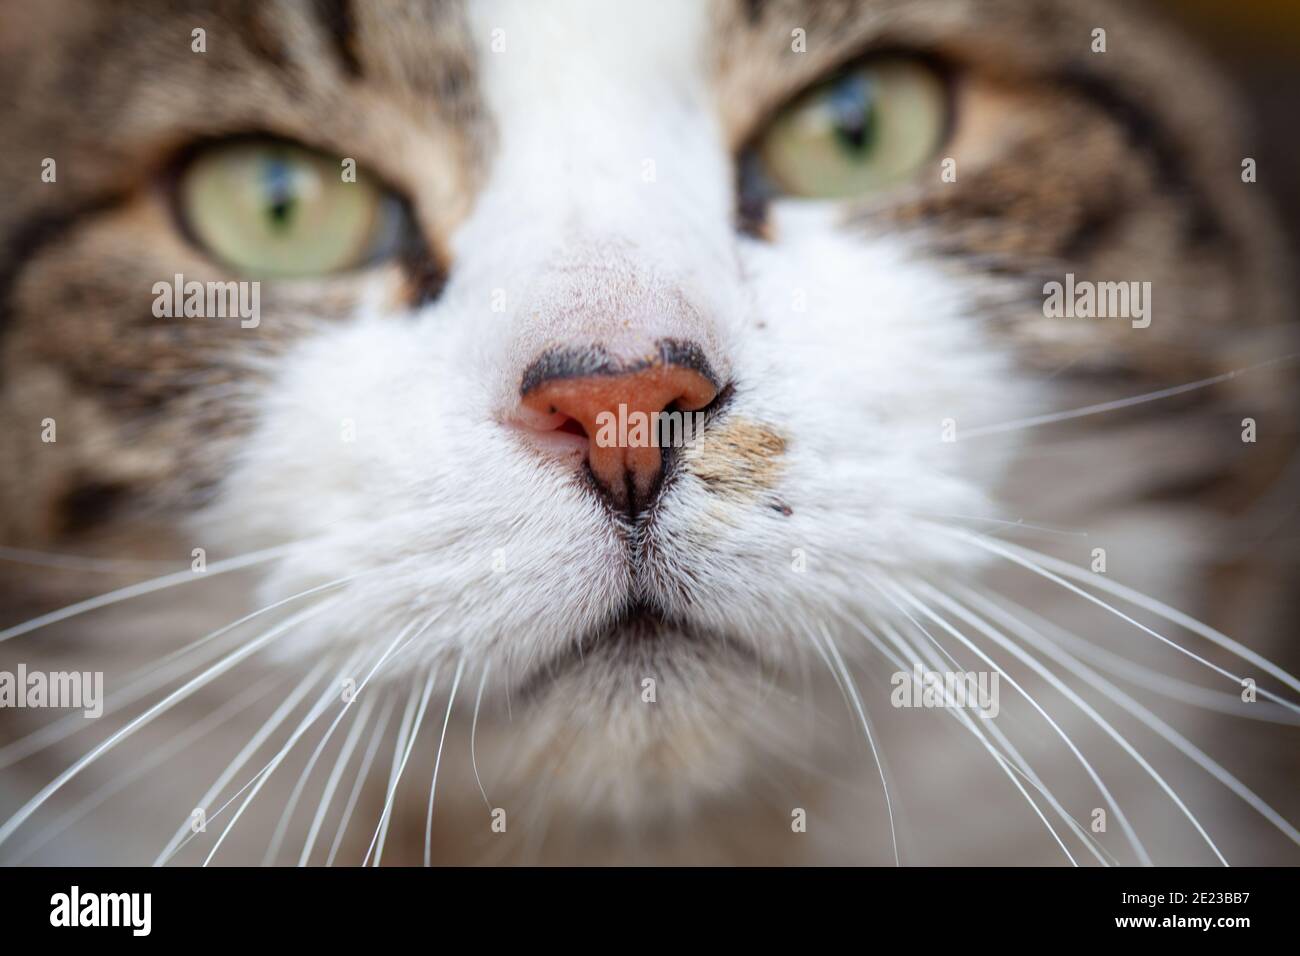 Close up portrait of a tabby and white cat with green eyes. High quality photo Stock Photo